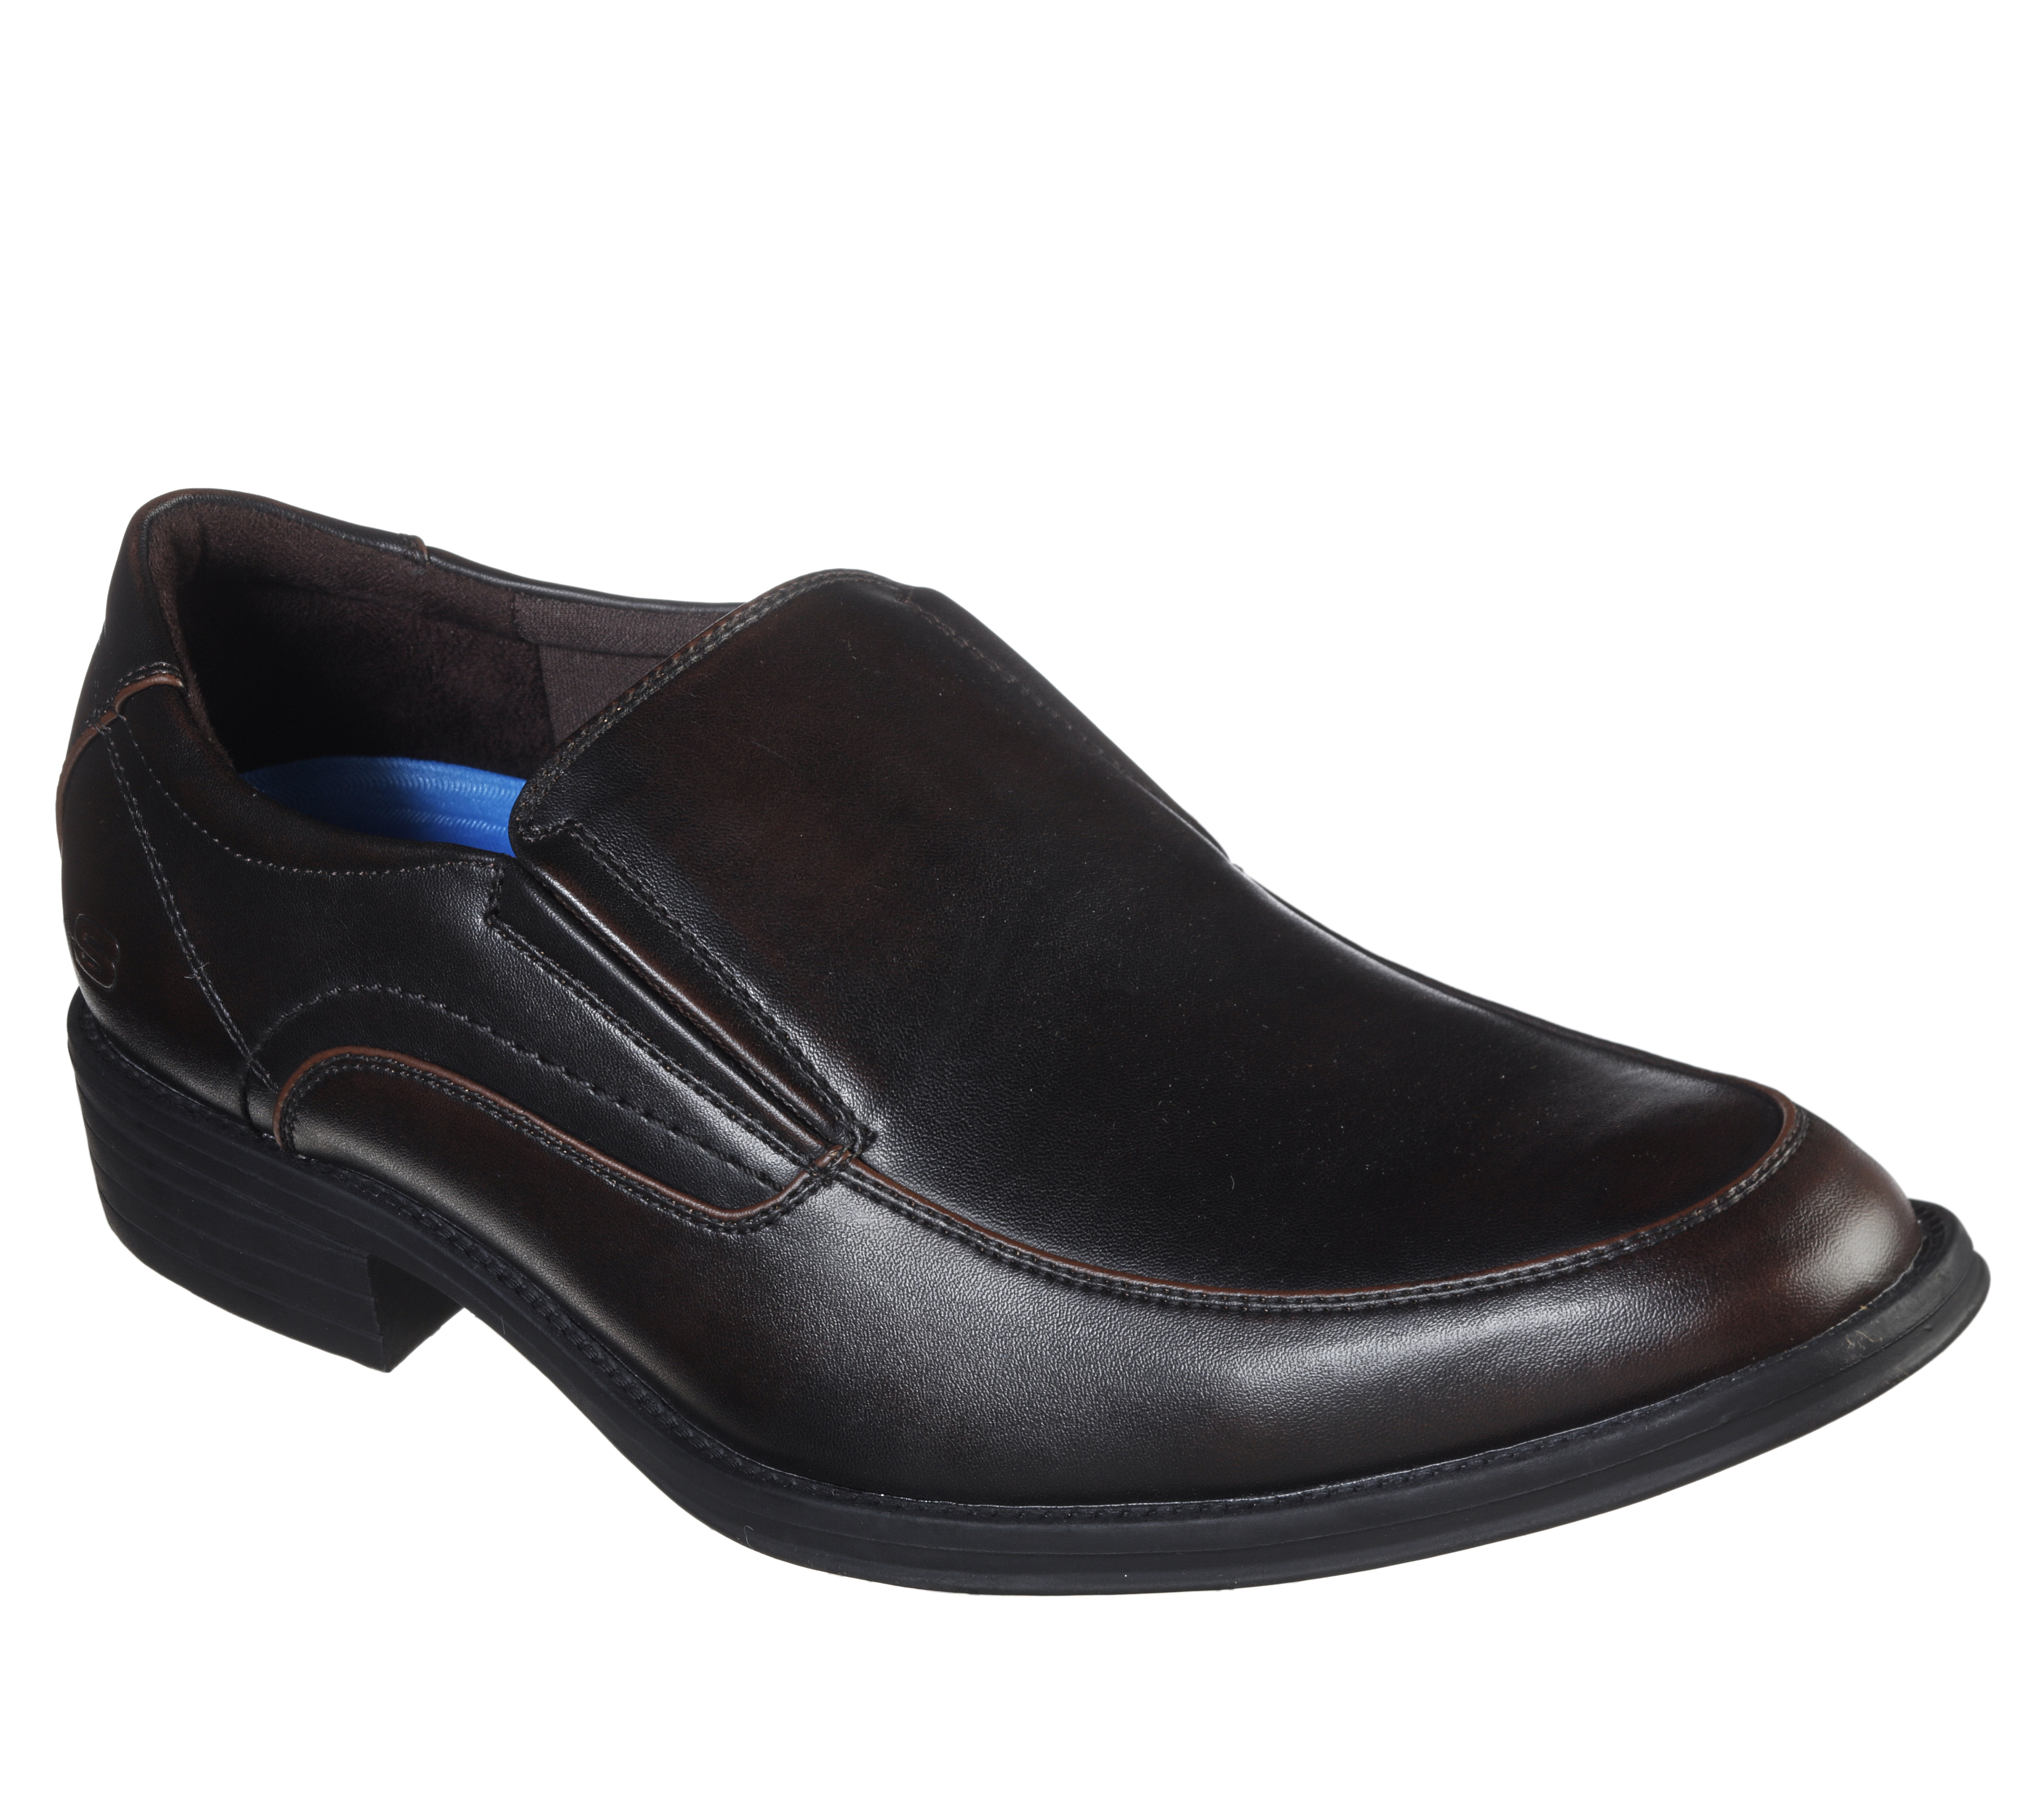 skechers formal shoes online india